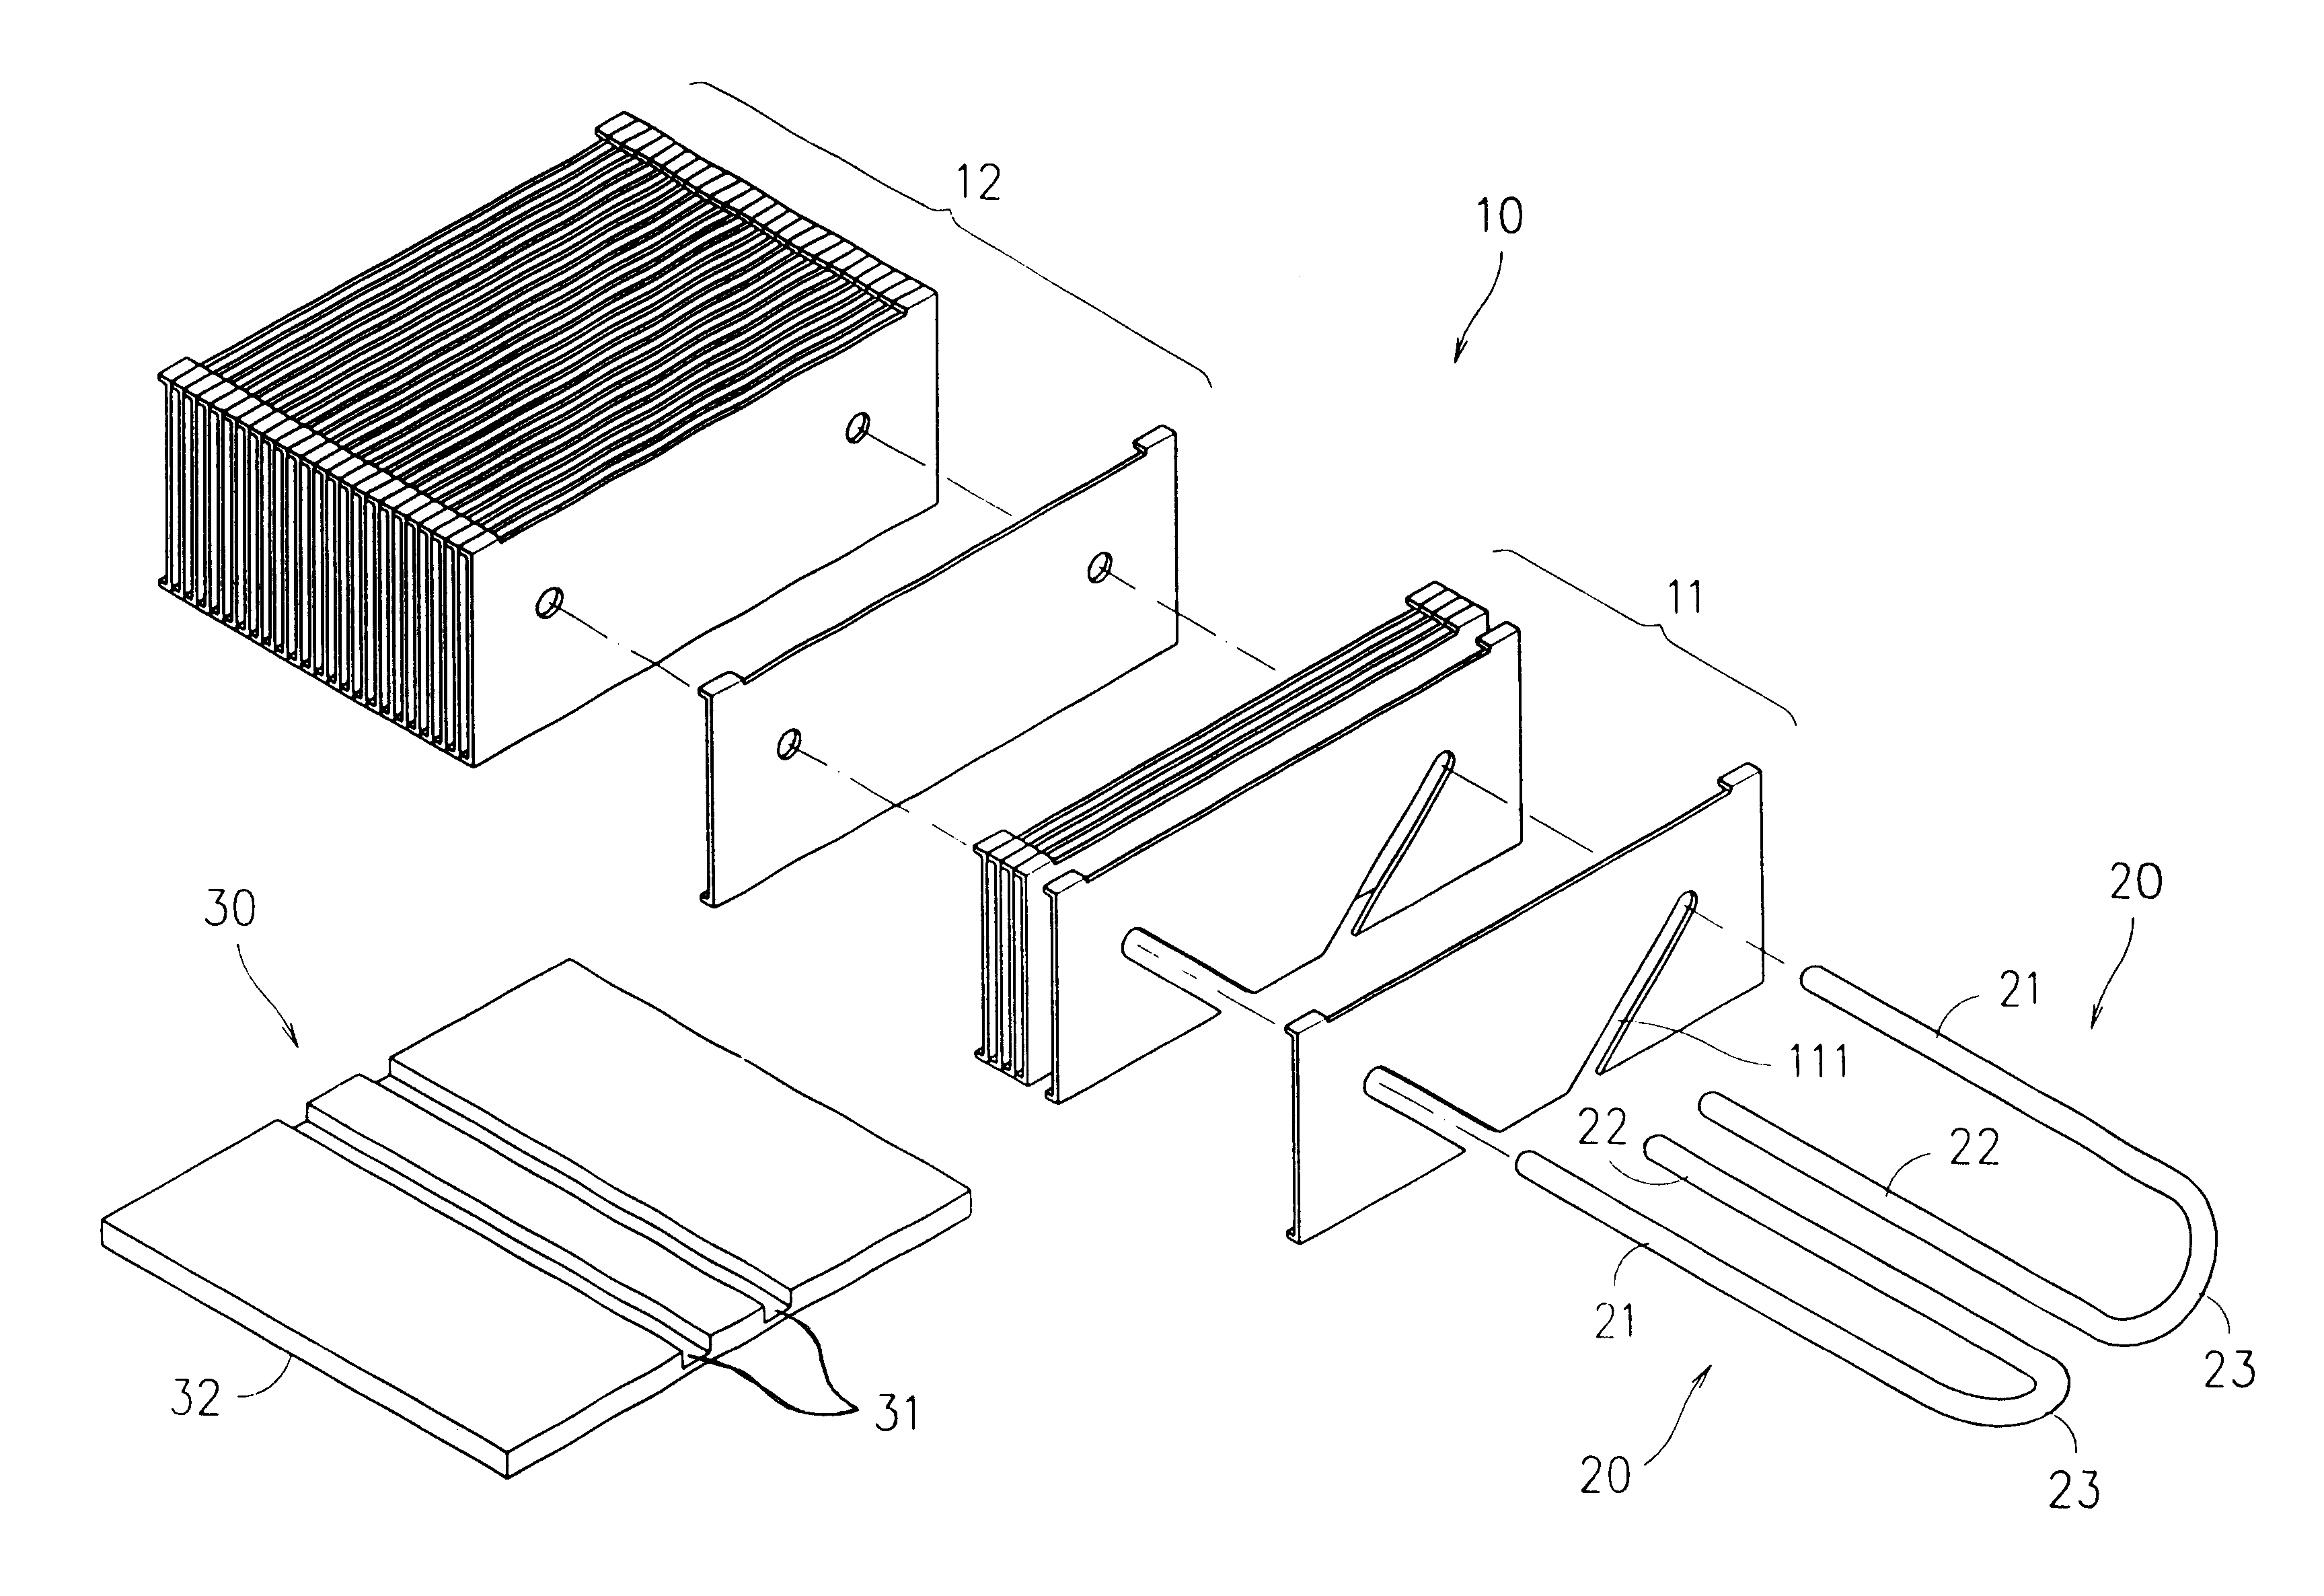 Tube-style radiator structure for computer